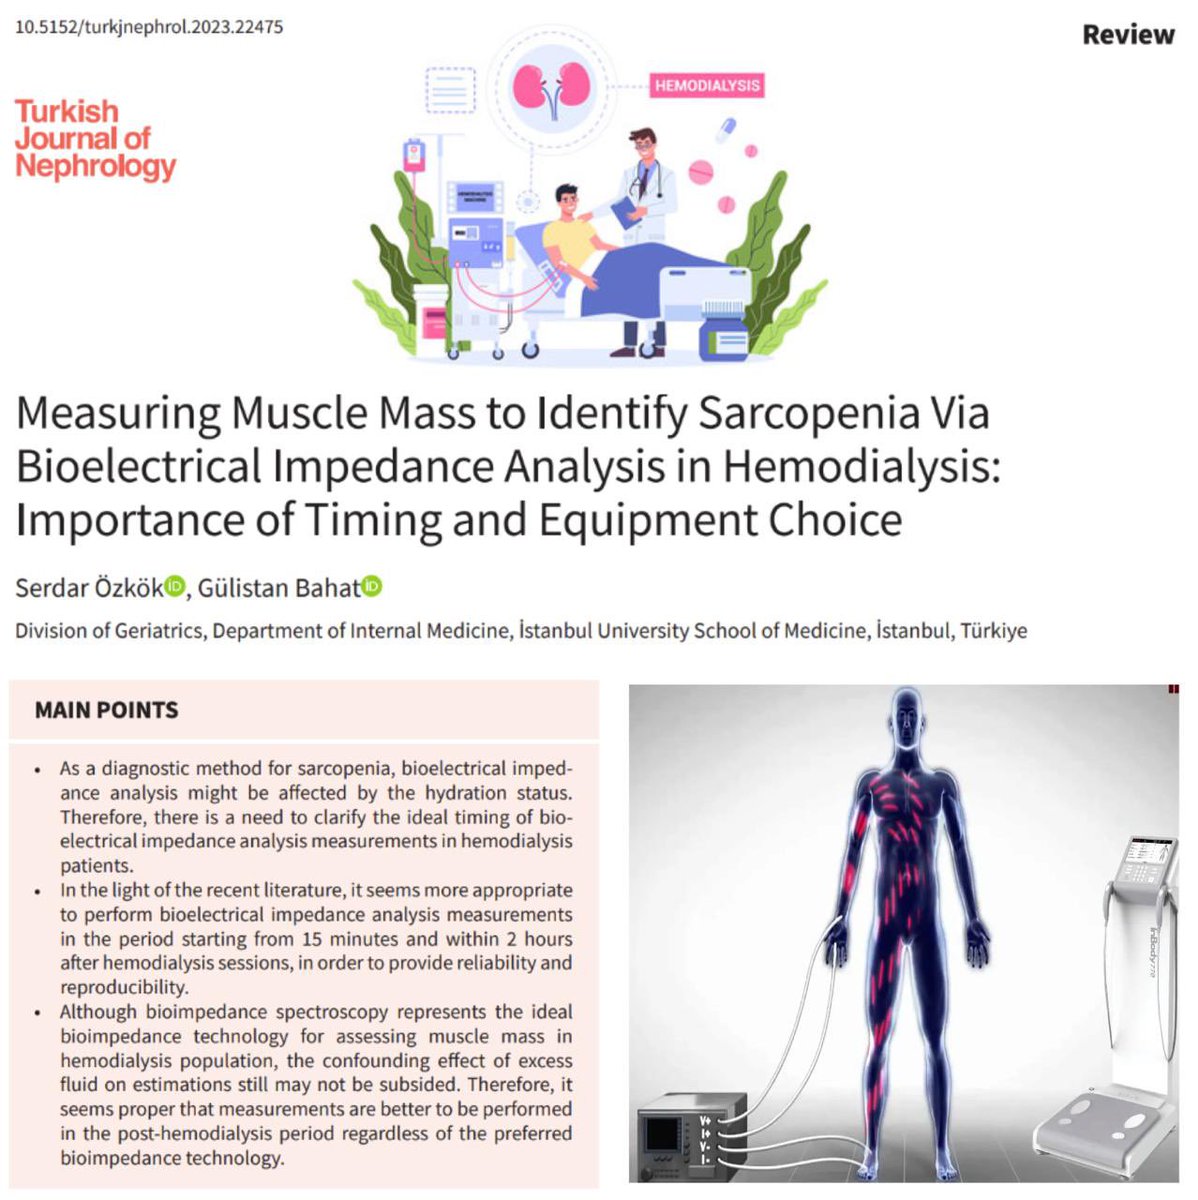 The literature data indicate that performing bioelectrical impedance analysis measurements in the period afer 15 minutes and within 2 hours afer hemodialysis session will aid in a better estimation of muscle mass in terms of reliability and reproducibility.